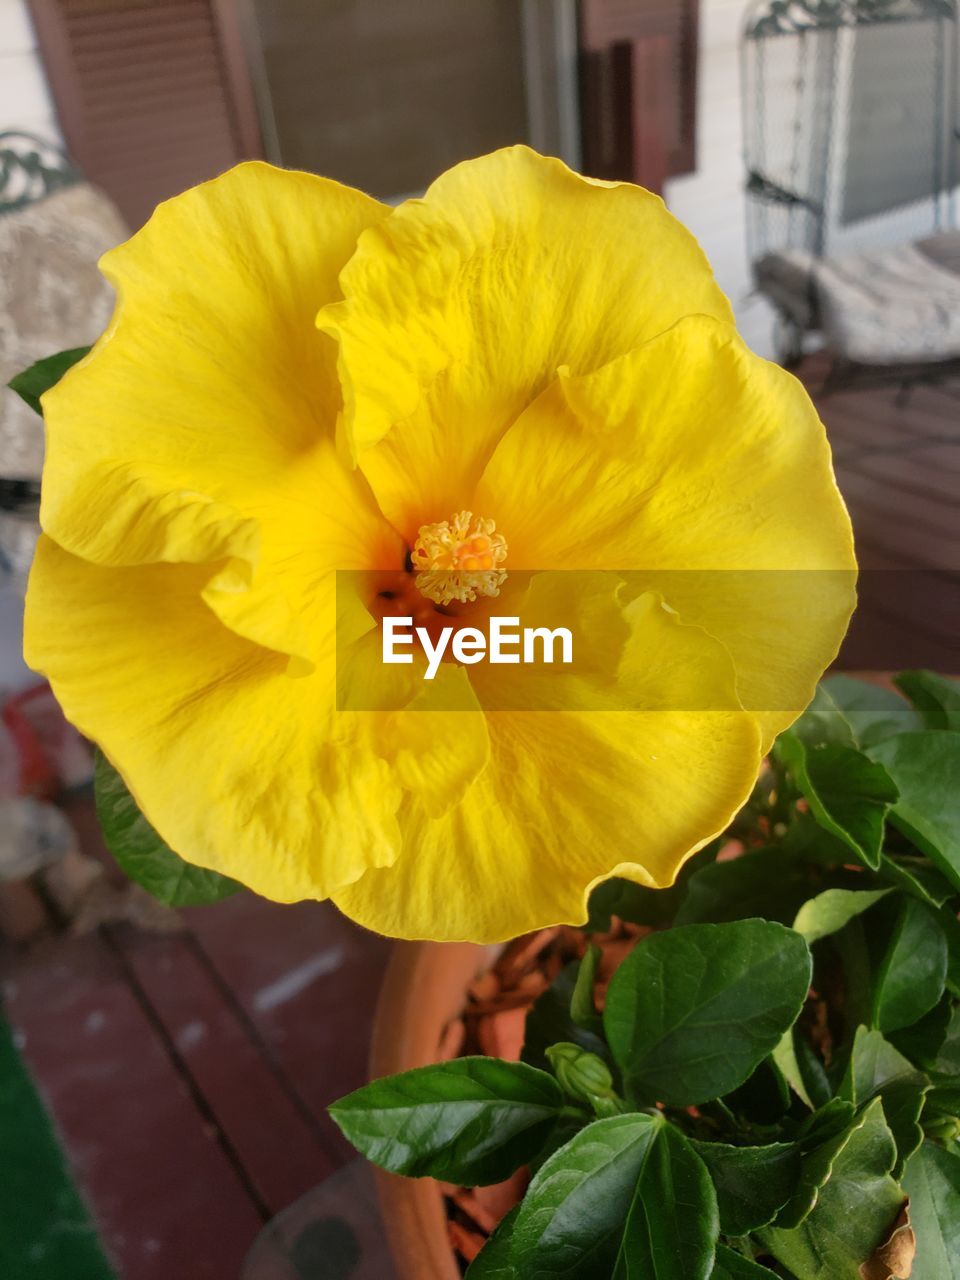 flowering plant, flower, yellow, freshness, plant, beauty in nature, flower head, close-up, inflorescence, petal, fragility, growth, nature, leaf, plant part, focus on foreground, outdoors, no people, hibiscus, vibrant color, springtime, blossom, day, pollen